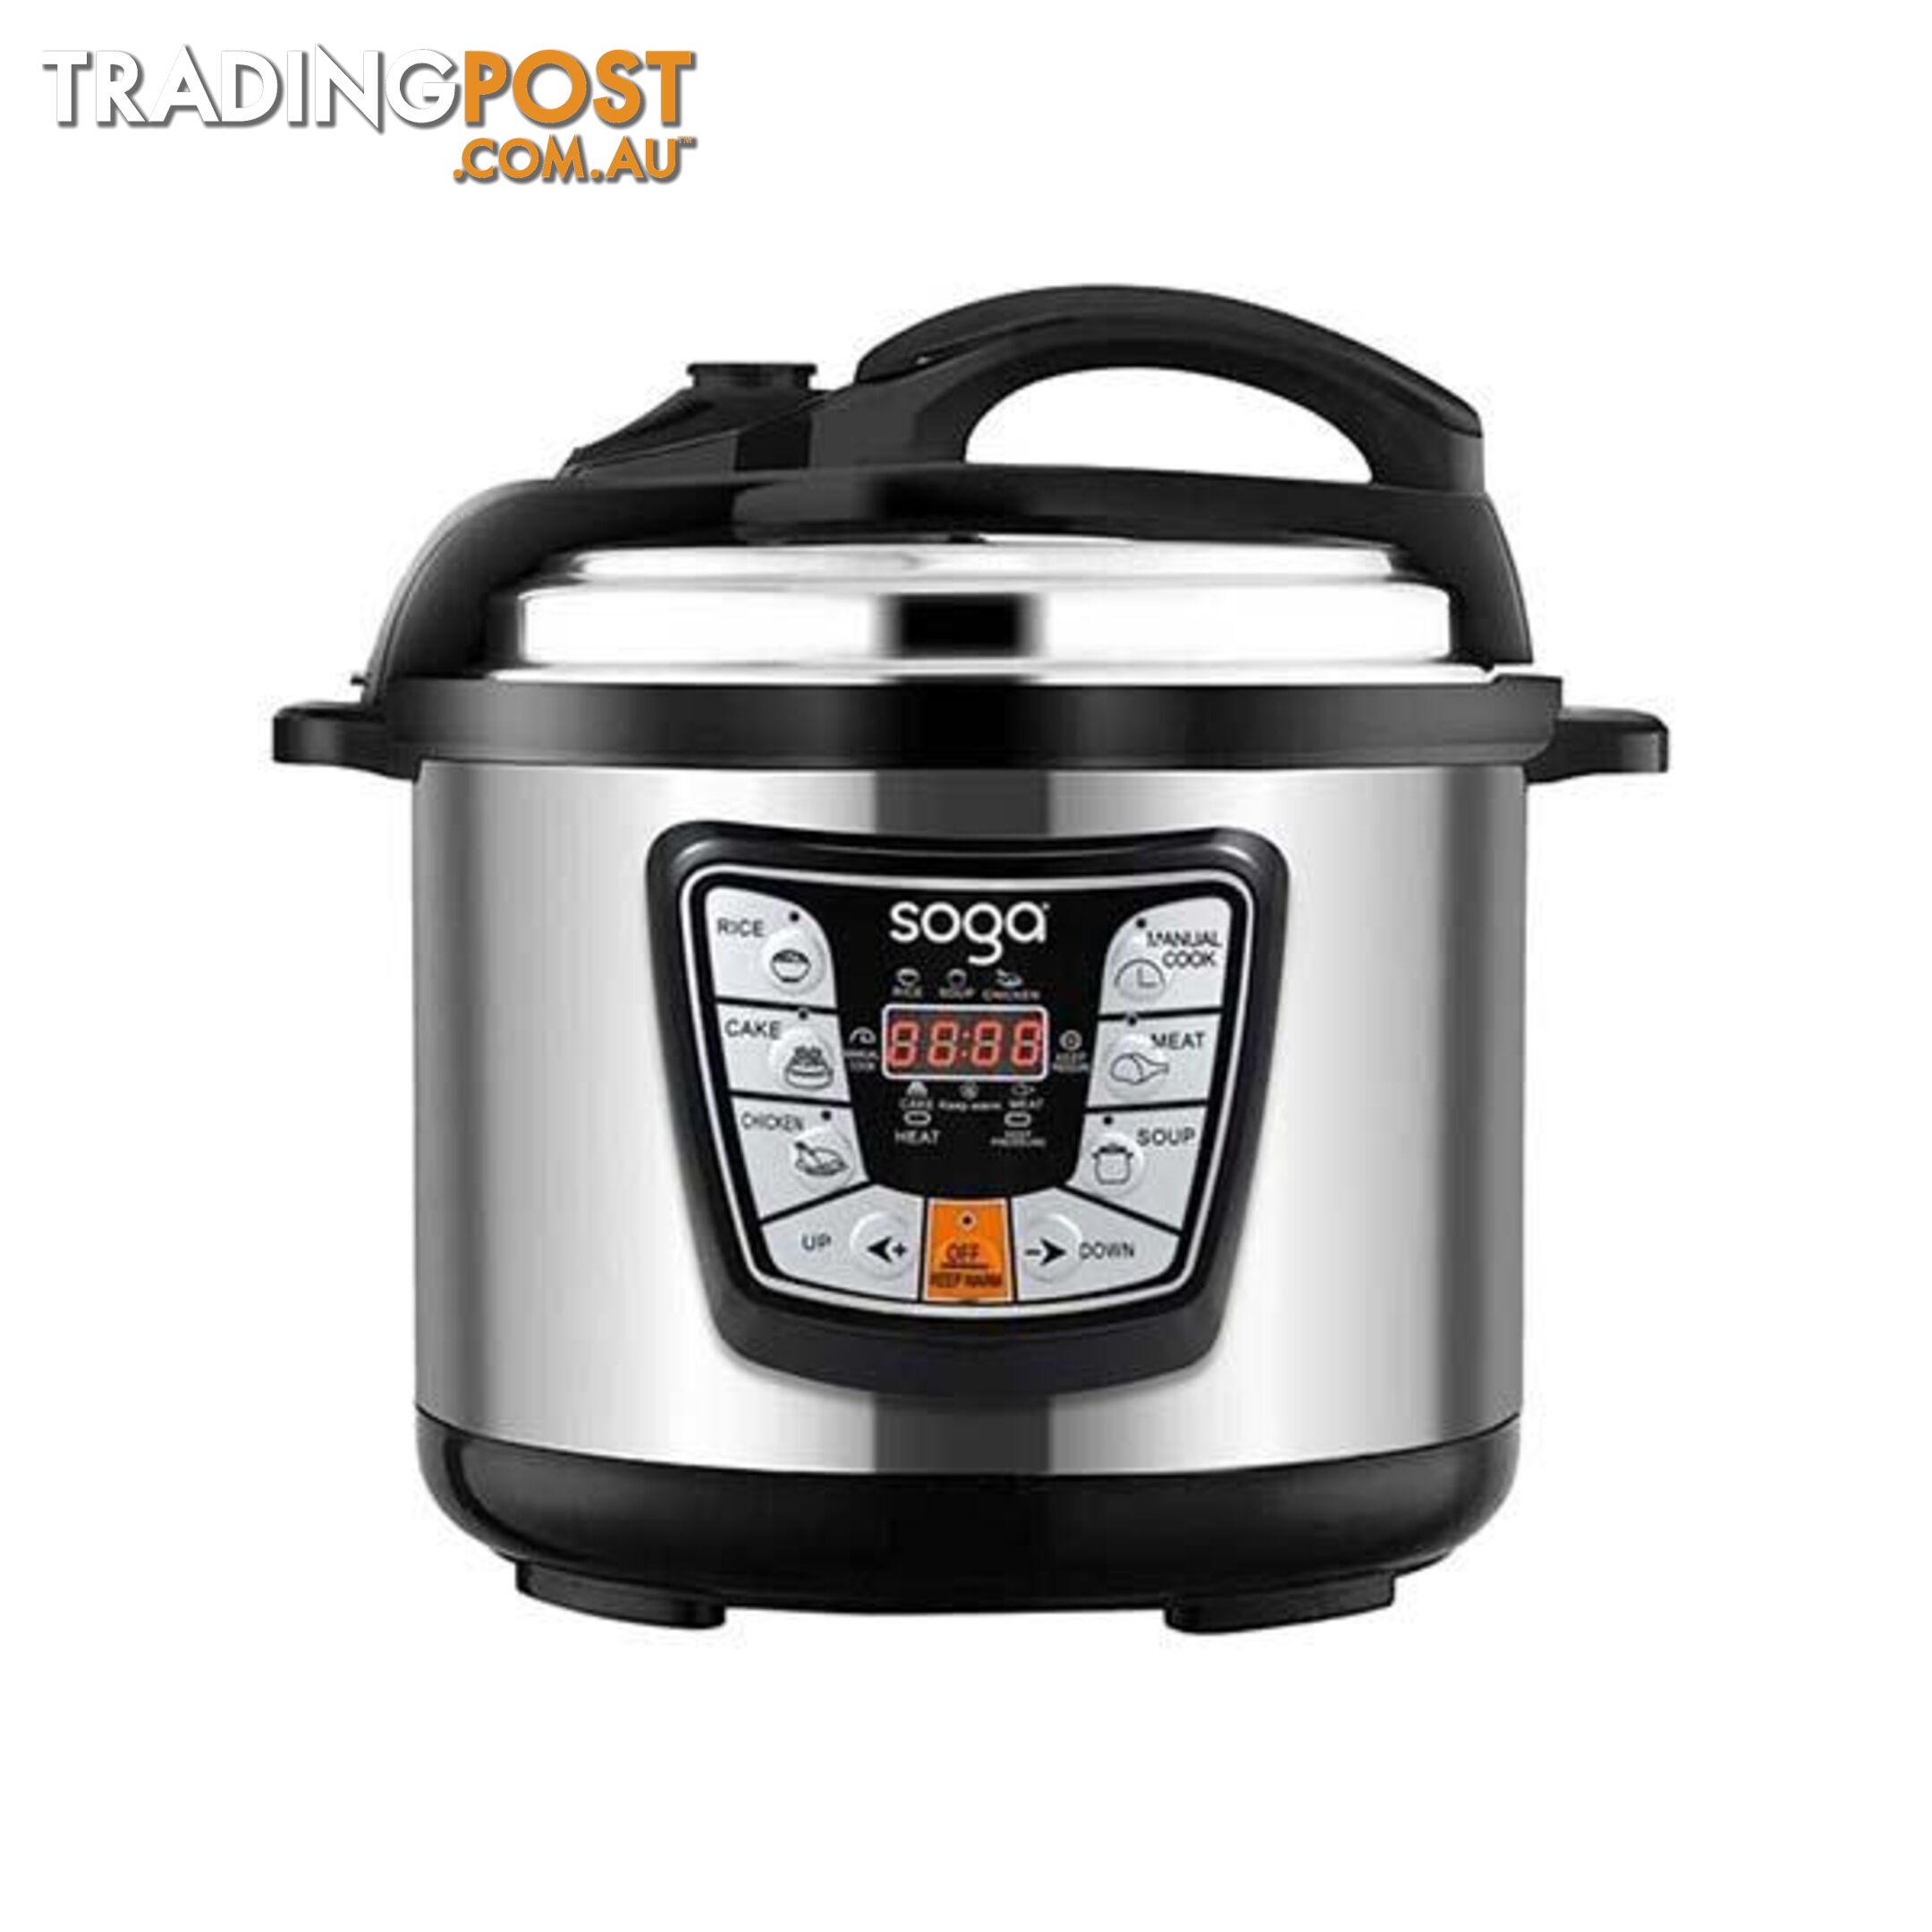 Soga Stainless Steel Electric Pressure Cooker 8L Nonstick 1600W - Soga - 9476062089771